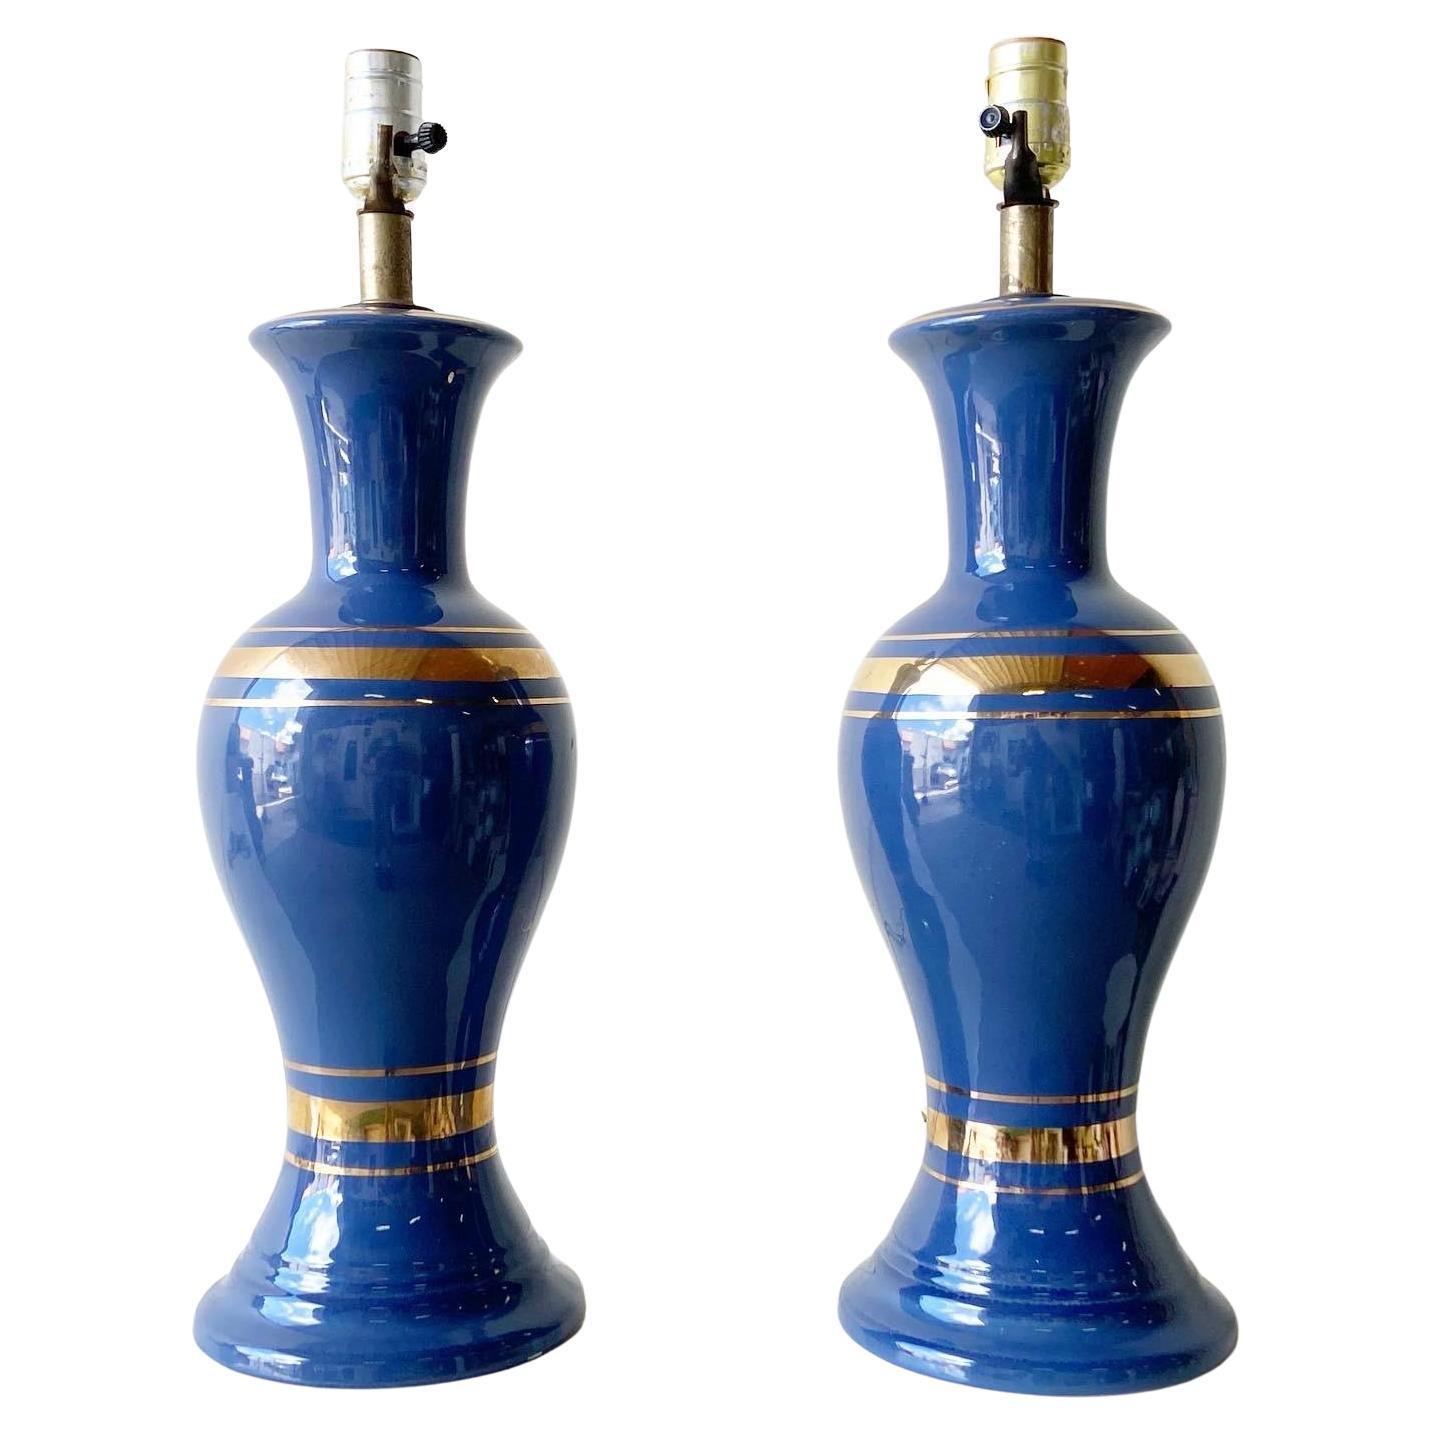 Mid Century Modern Blue and Gold Porcelain Table Lamps – a Pair For Sale